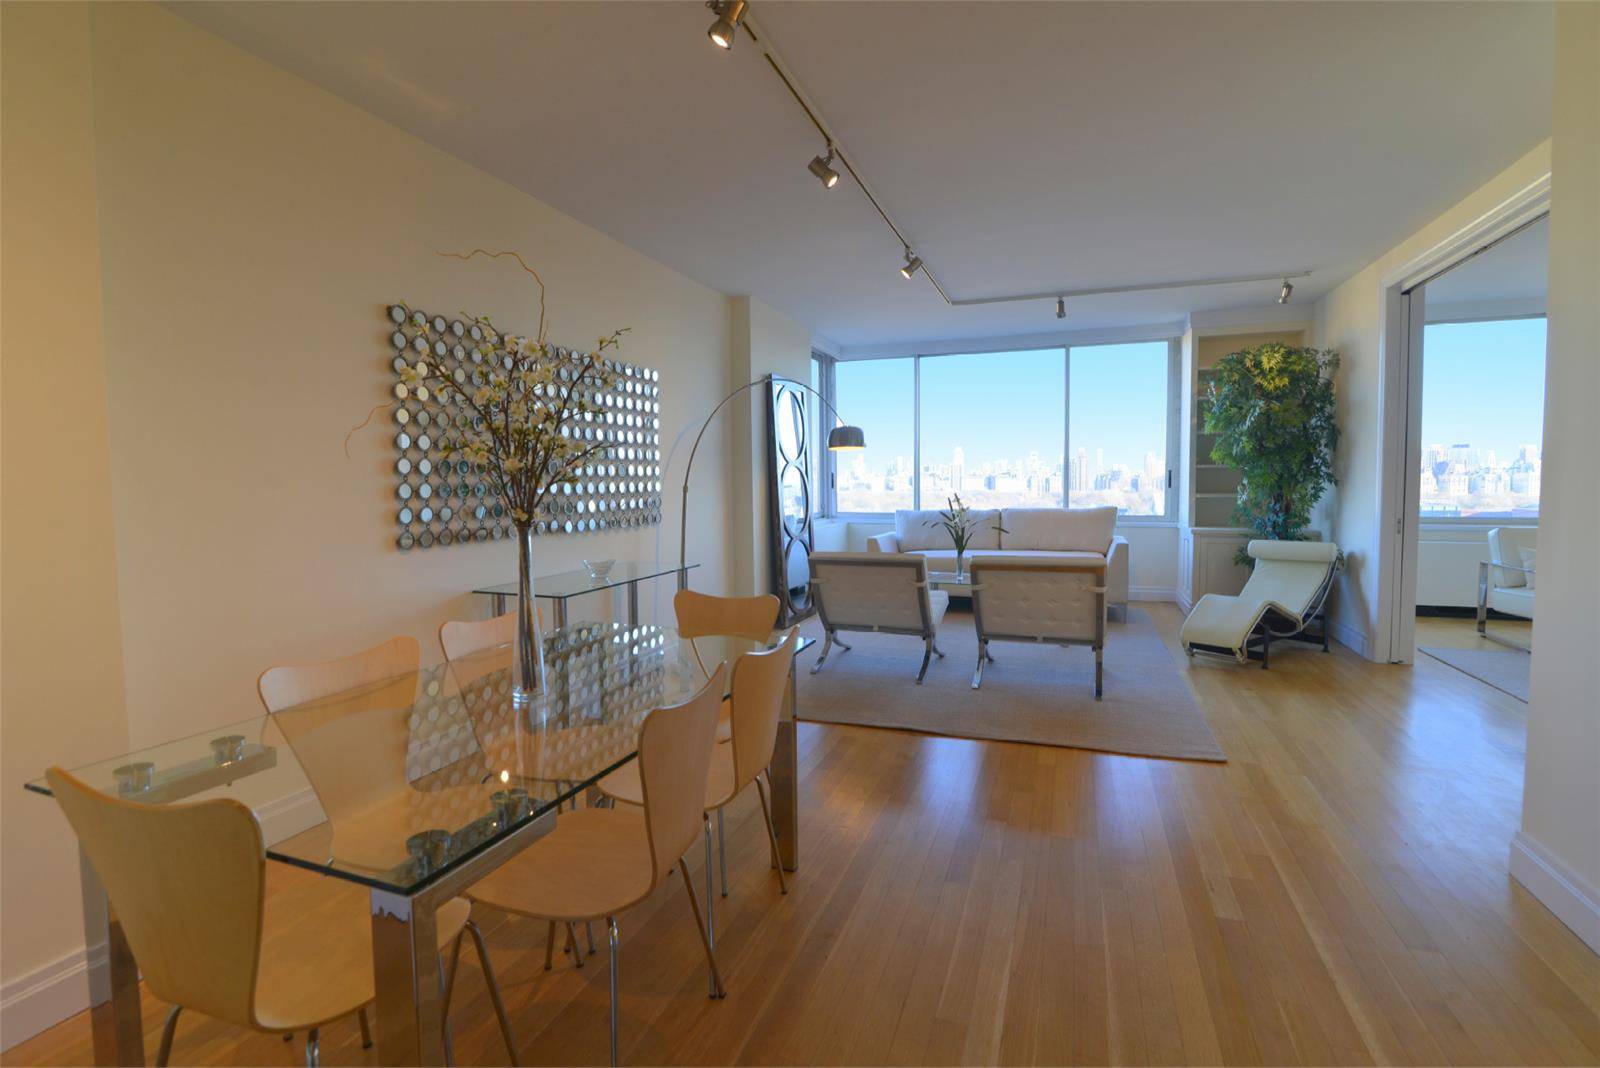 THE RESIDENCEThis is the masterpiece three bedroom condominium home of your dreams, just steps off Central Park !